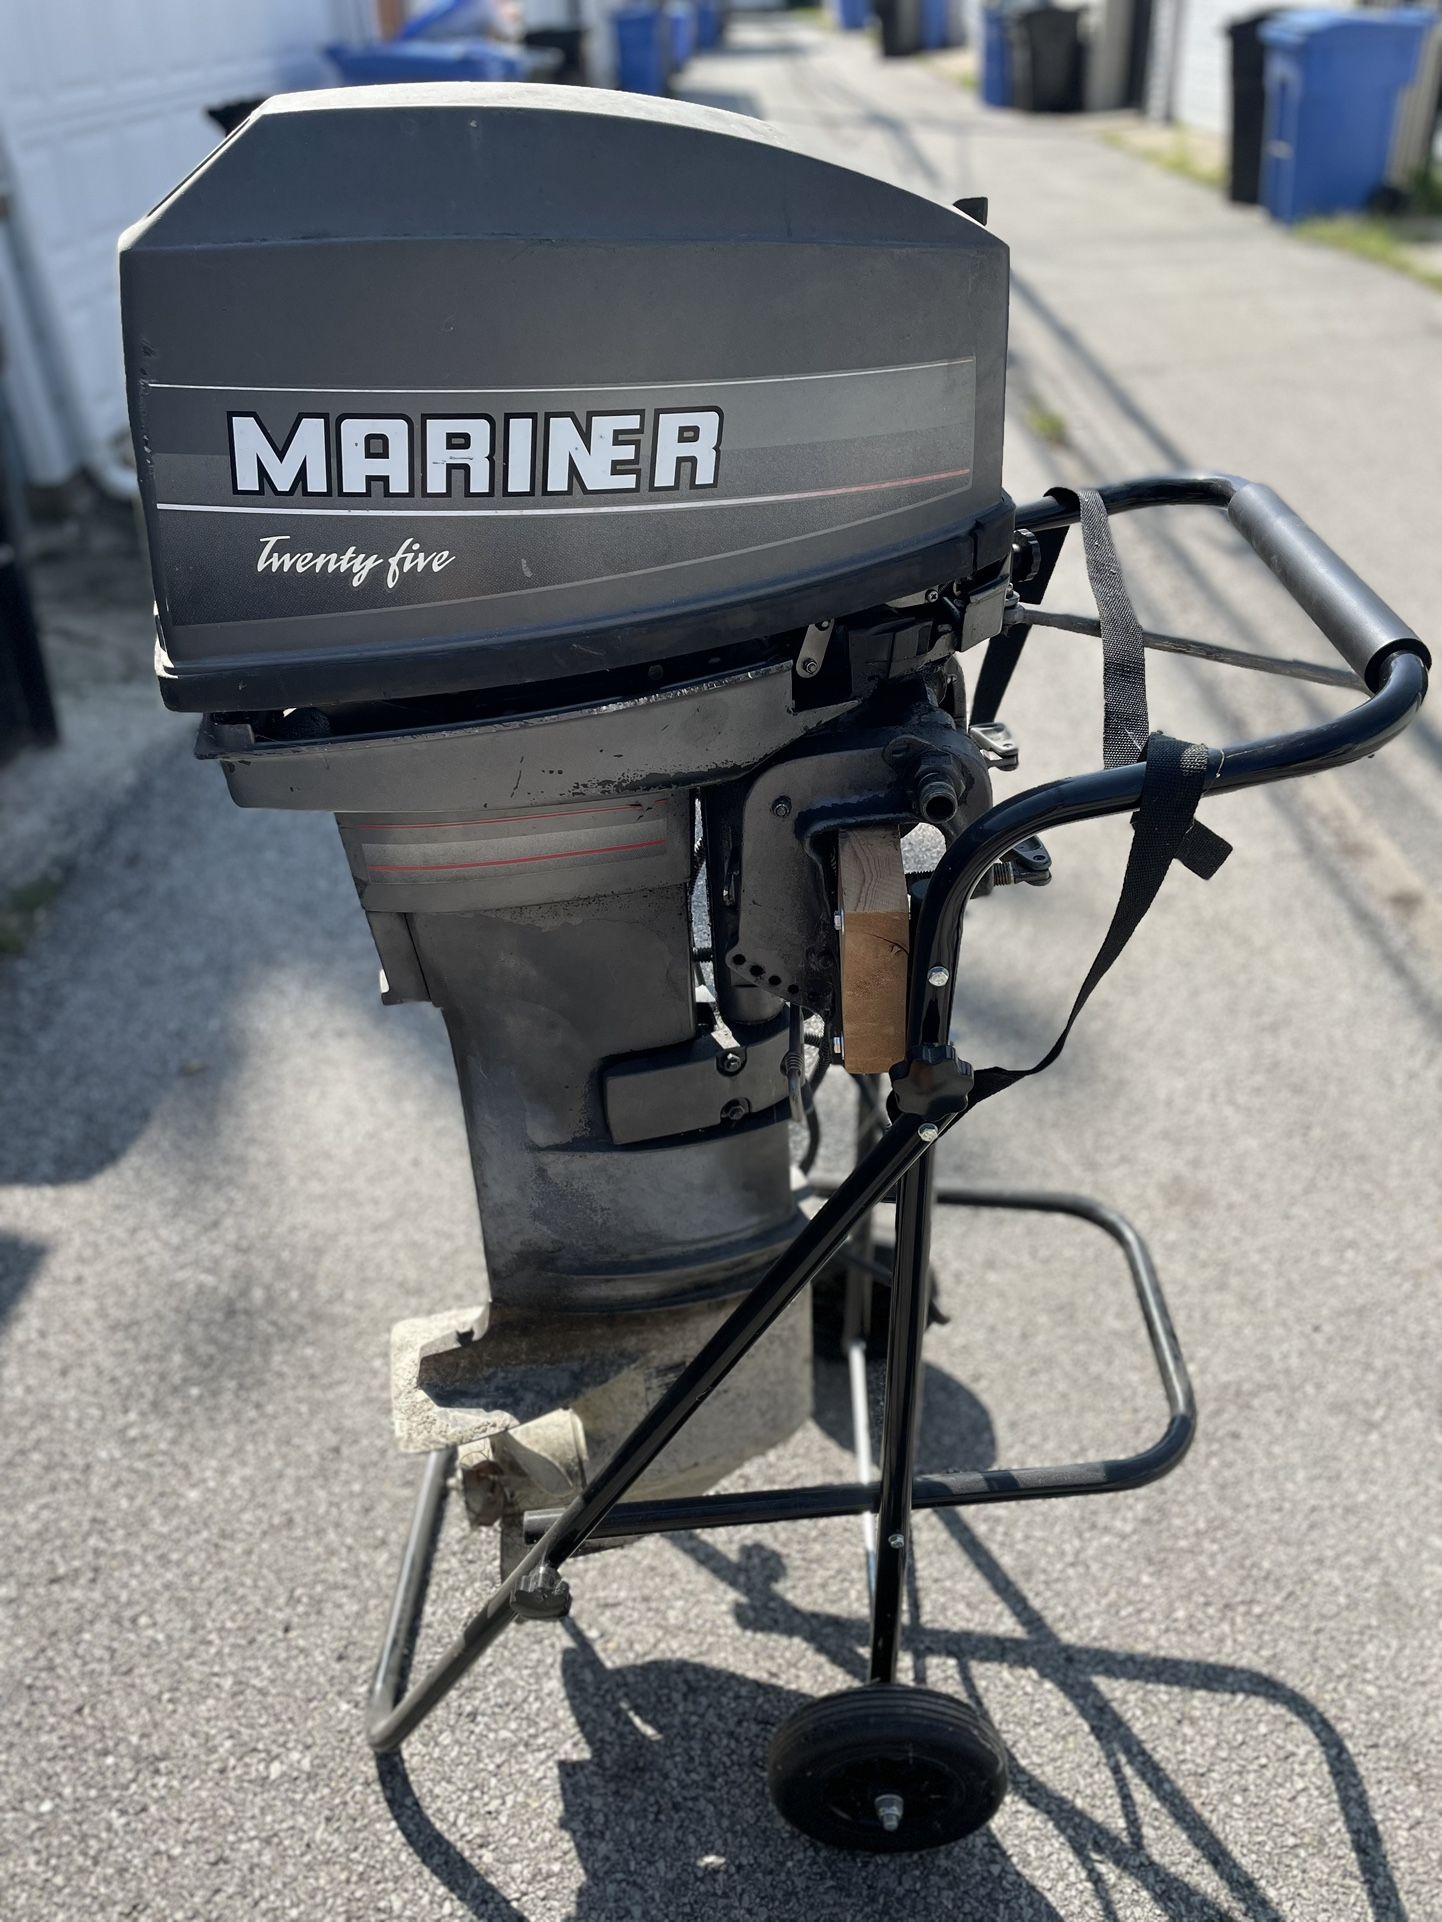 Outboard Motor Stand - included Mariner 25hp Outboard Motor (Seized)